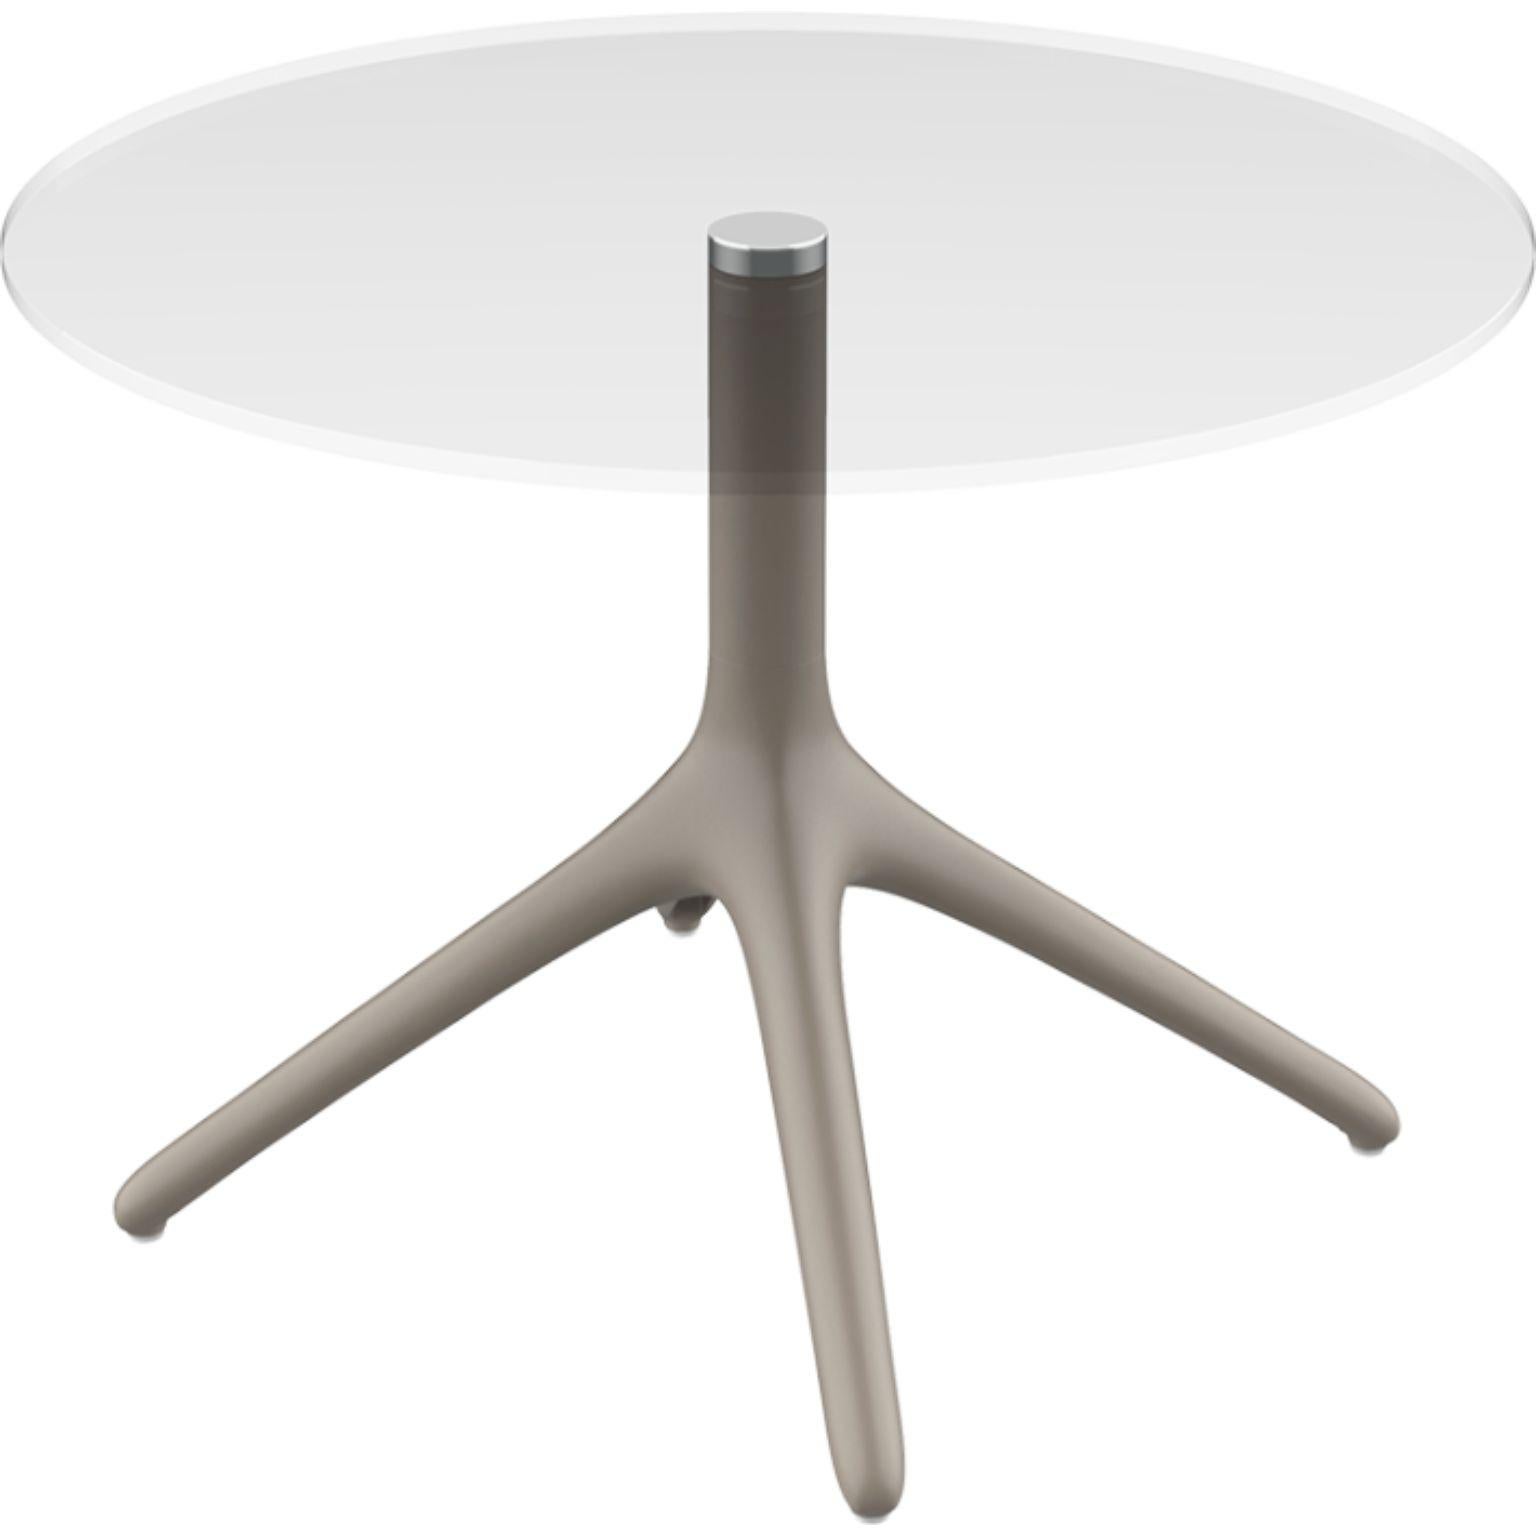 Spanish Uni Chocolate Table 50 by Mowee For Sale